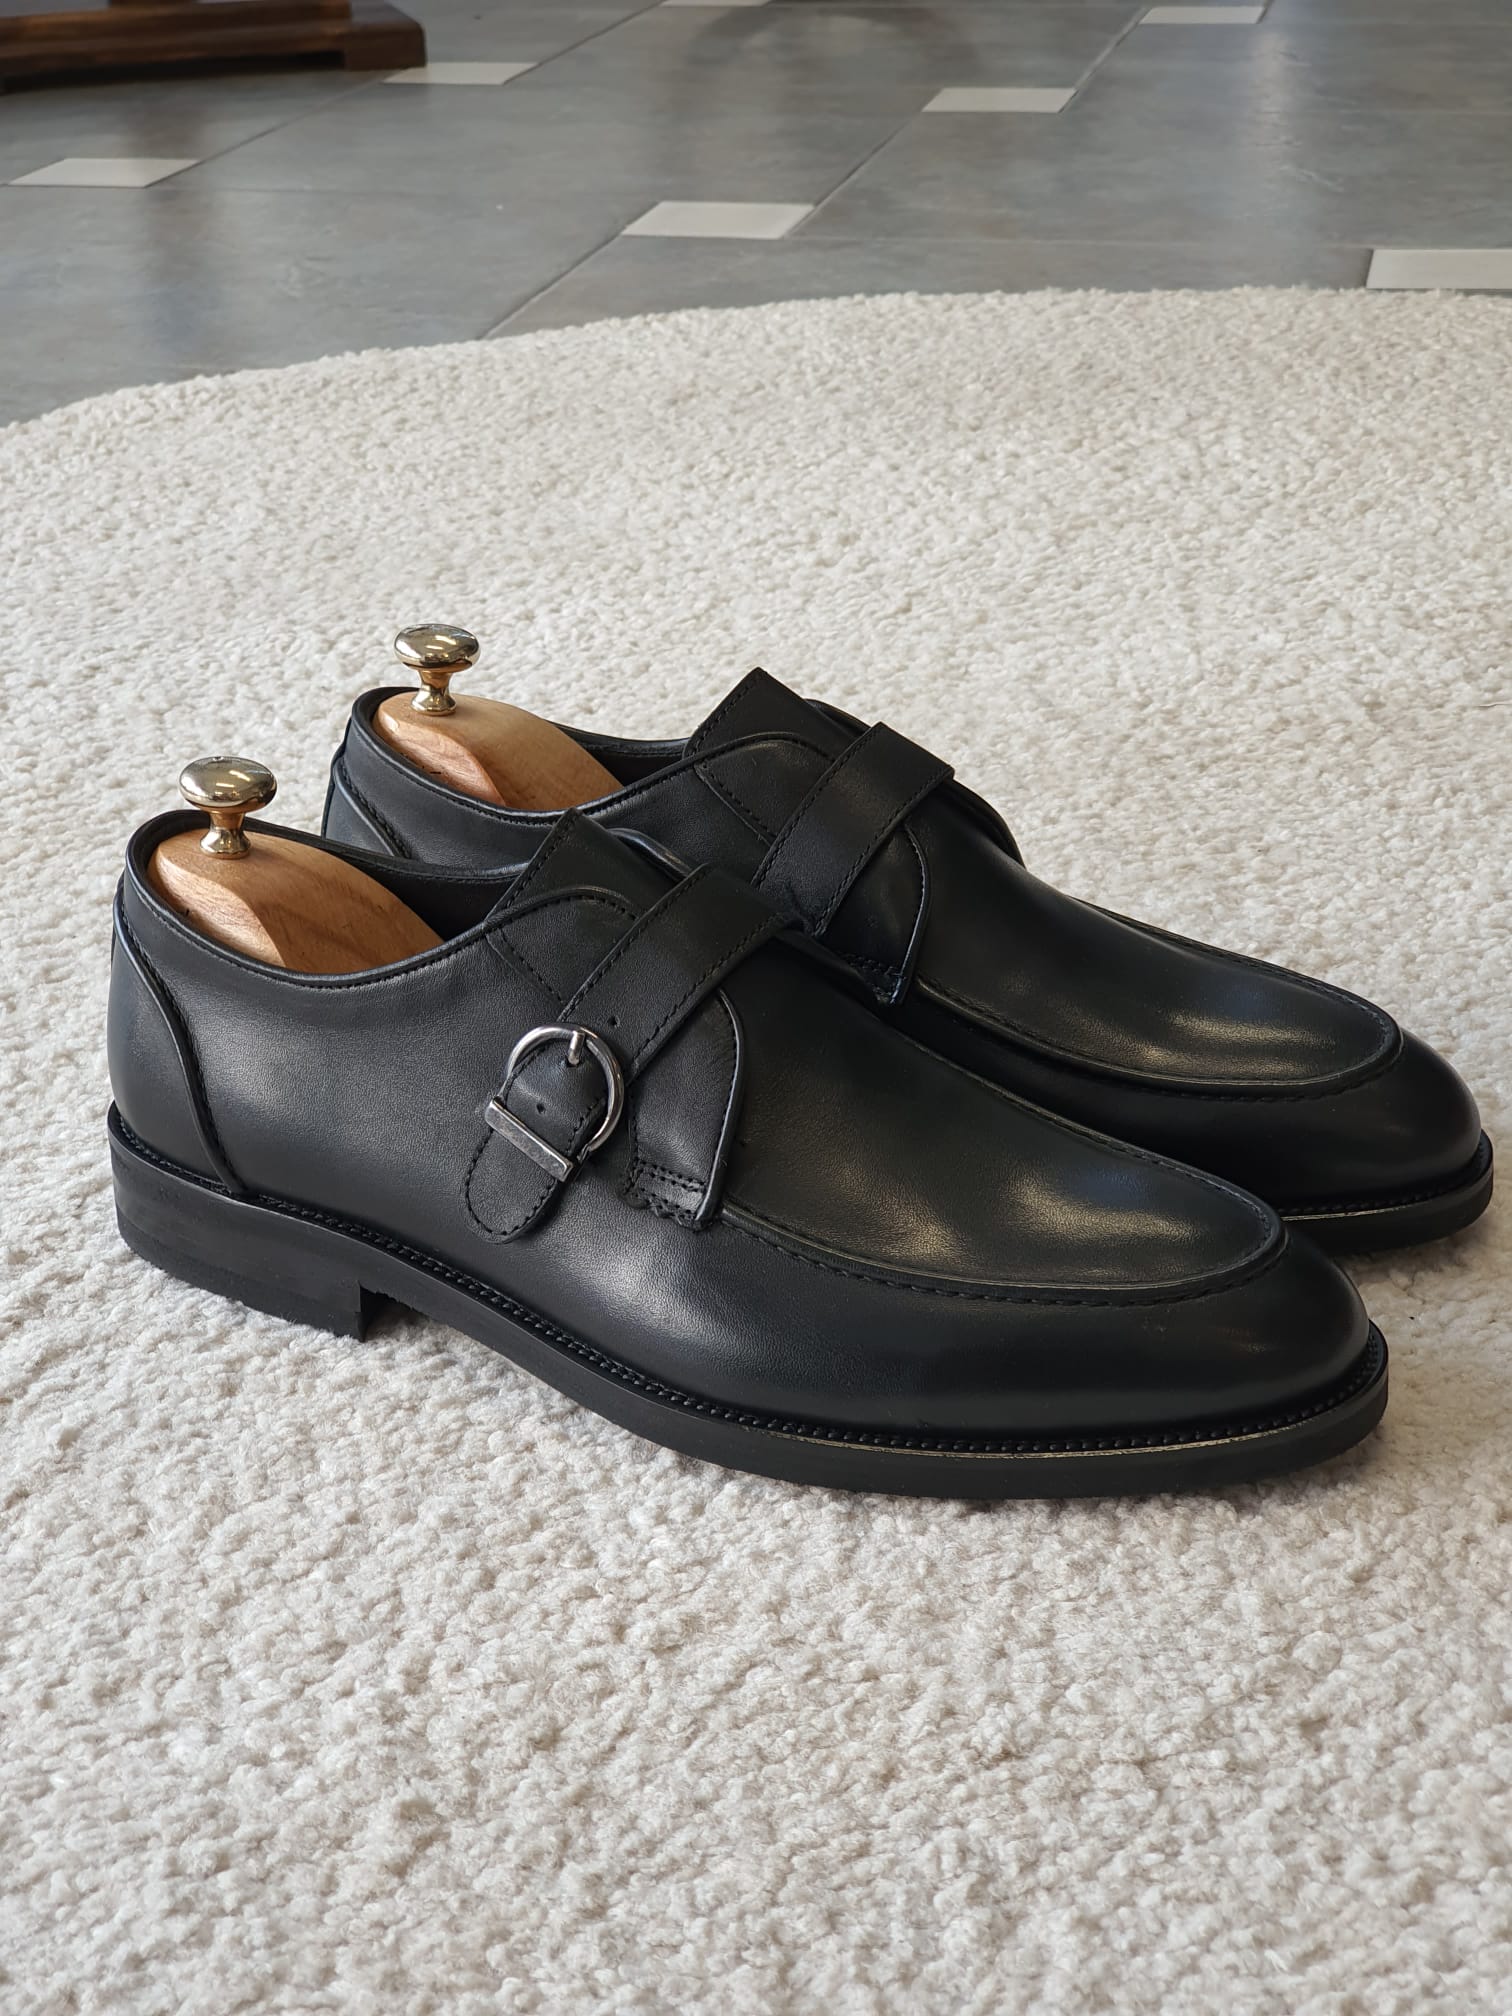 SARDINELLI BLACK SINGLE BUCKLE WITH RUBBER SOLE CLASSIC LEATHER SHOES